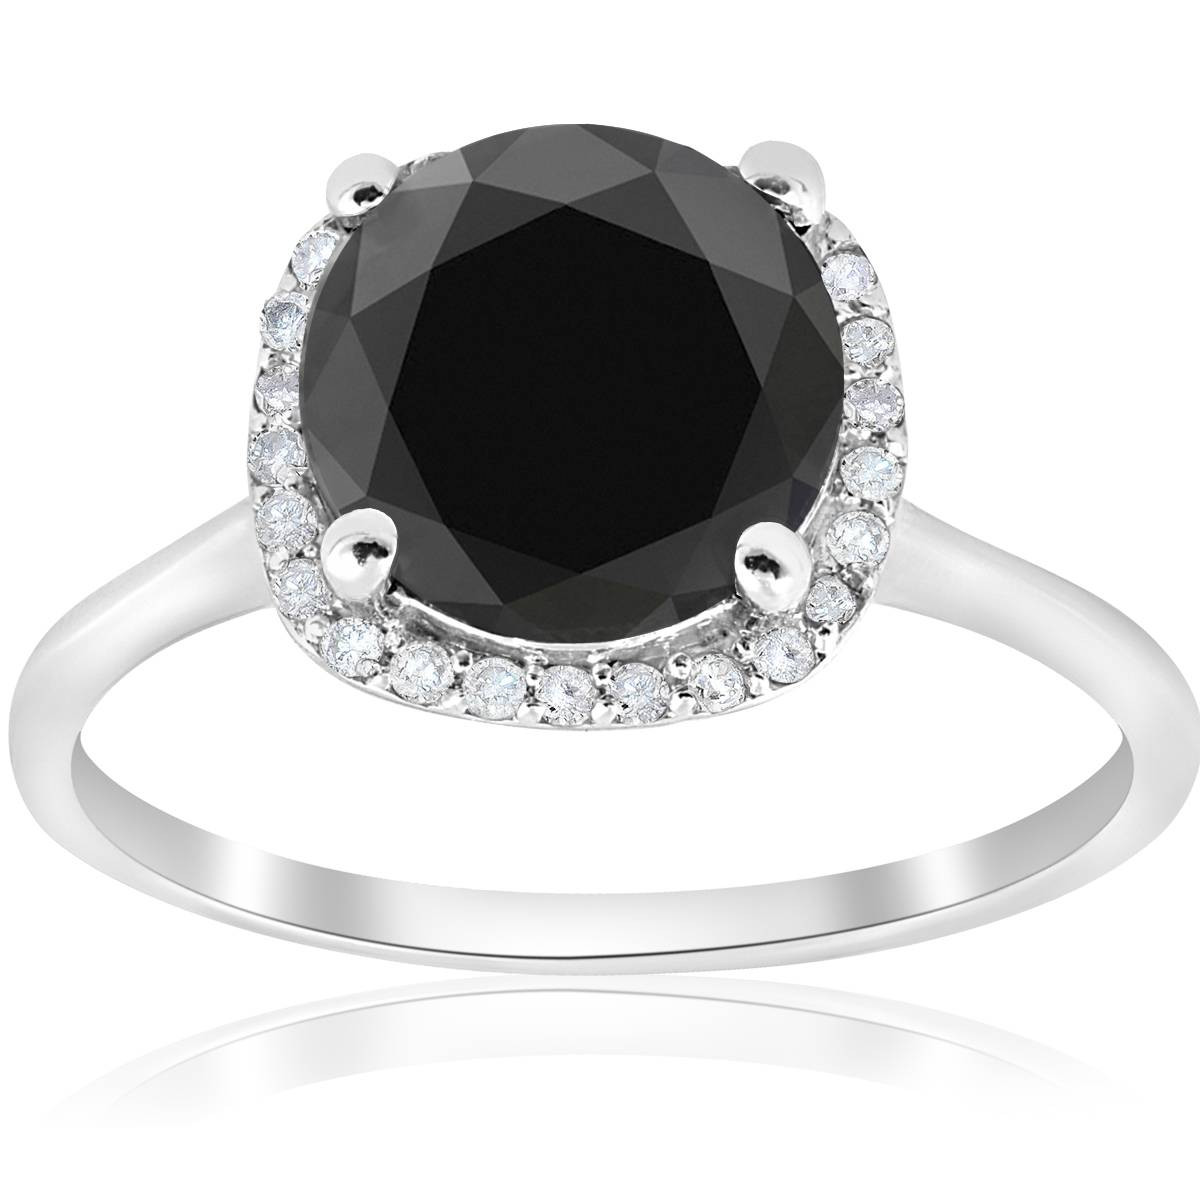 White And Black Diamond Engagement Rings
 3 1 10ct Treated Black Diamond Cushion Halo Engagement